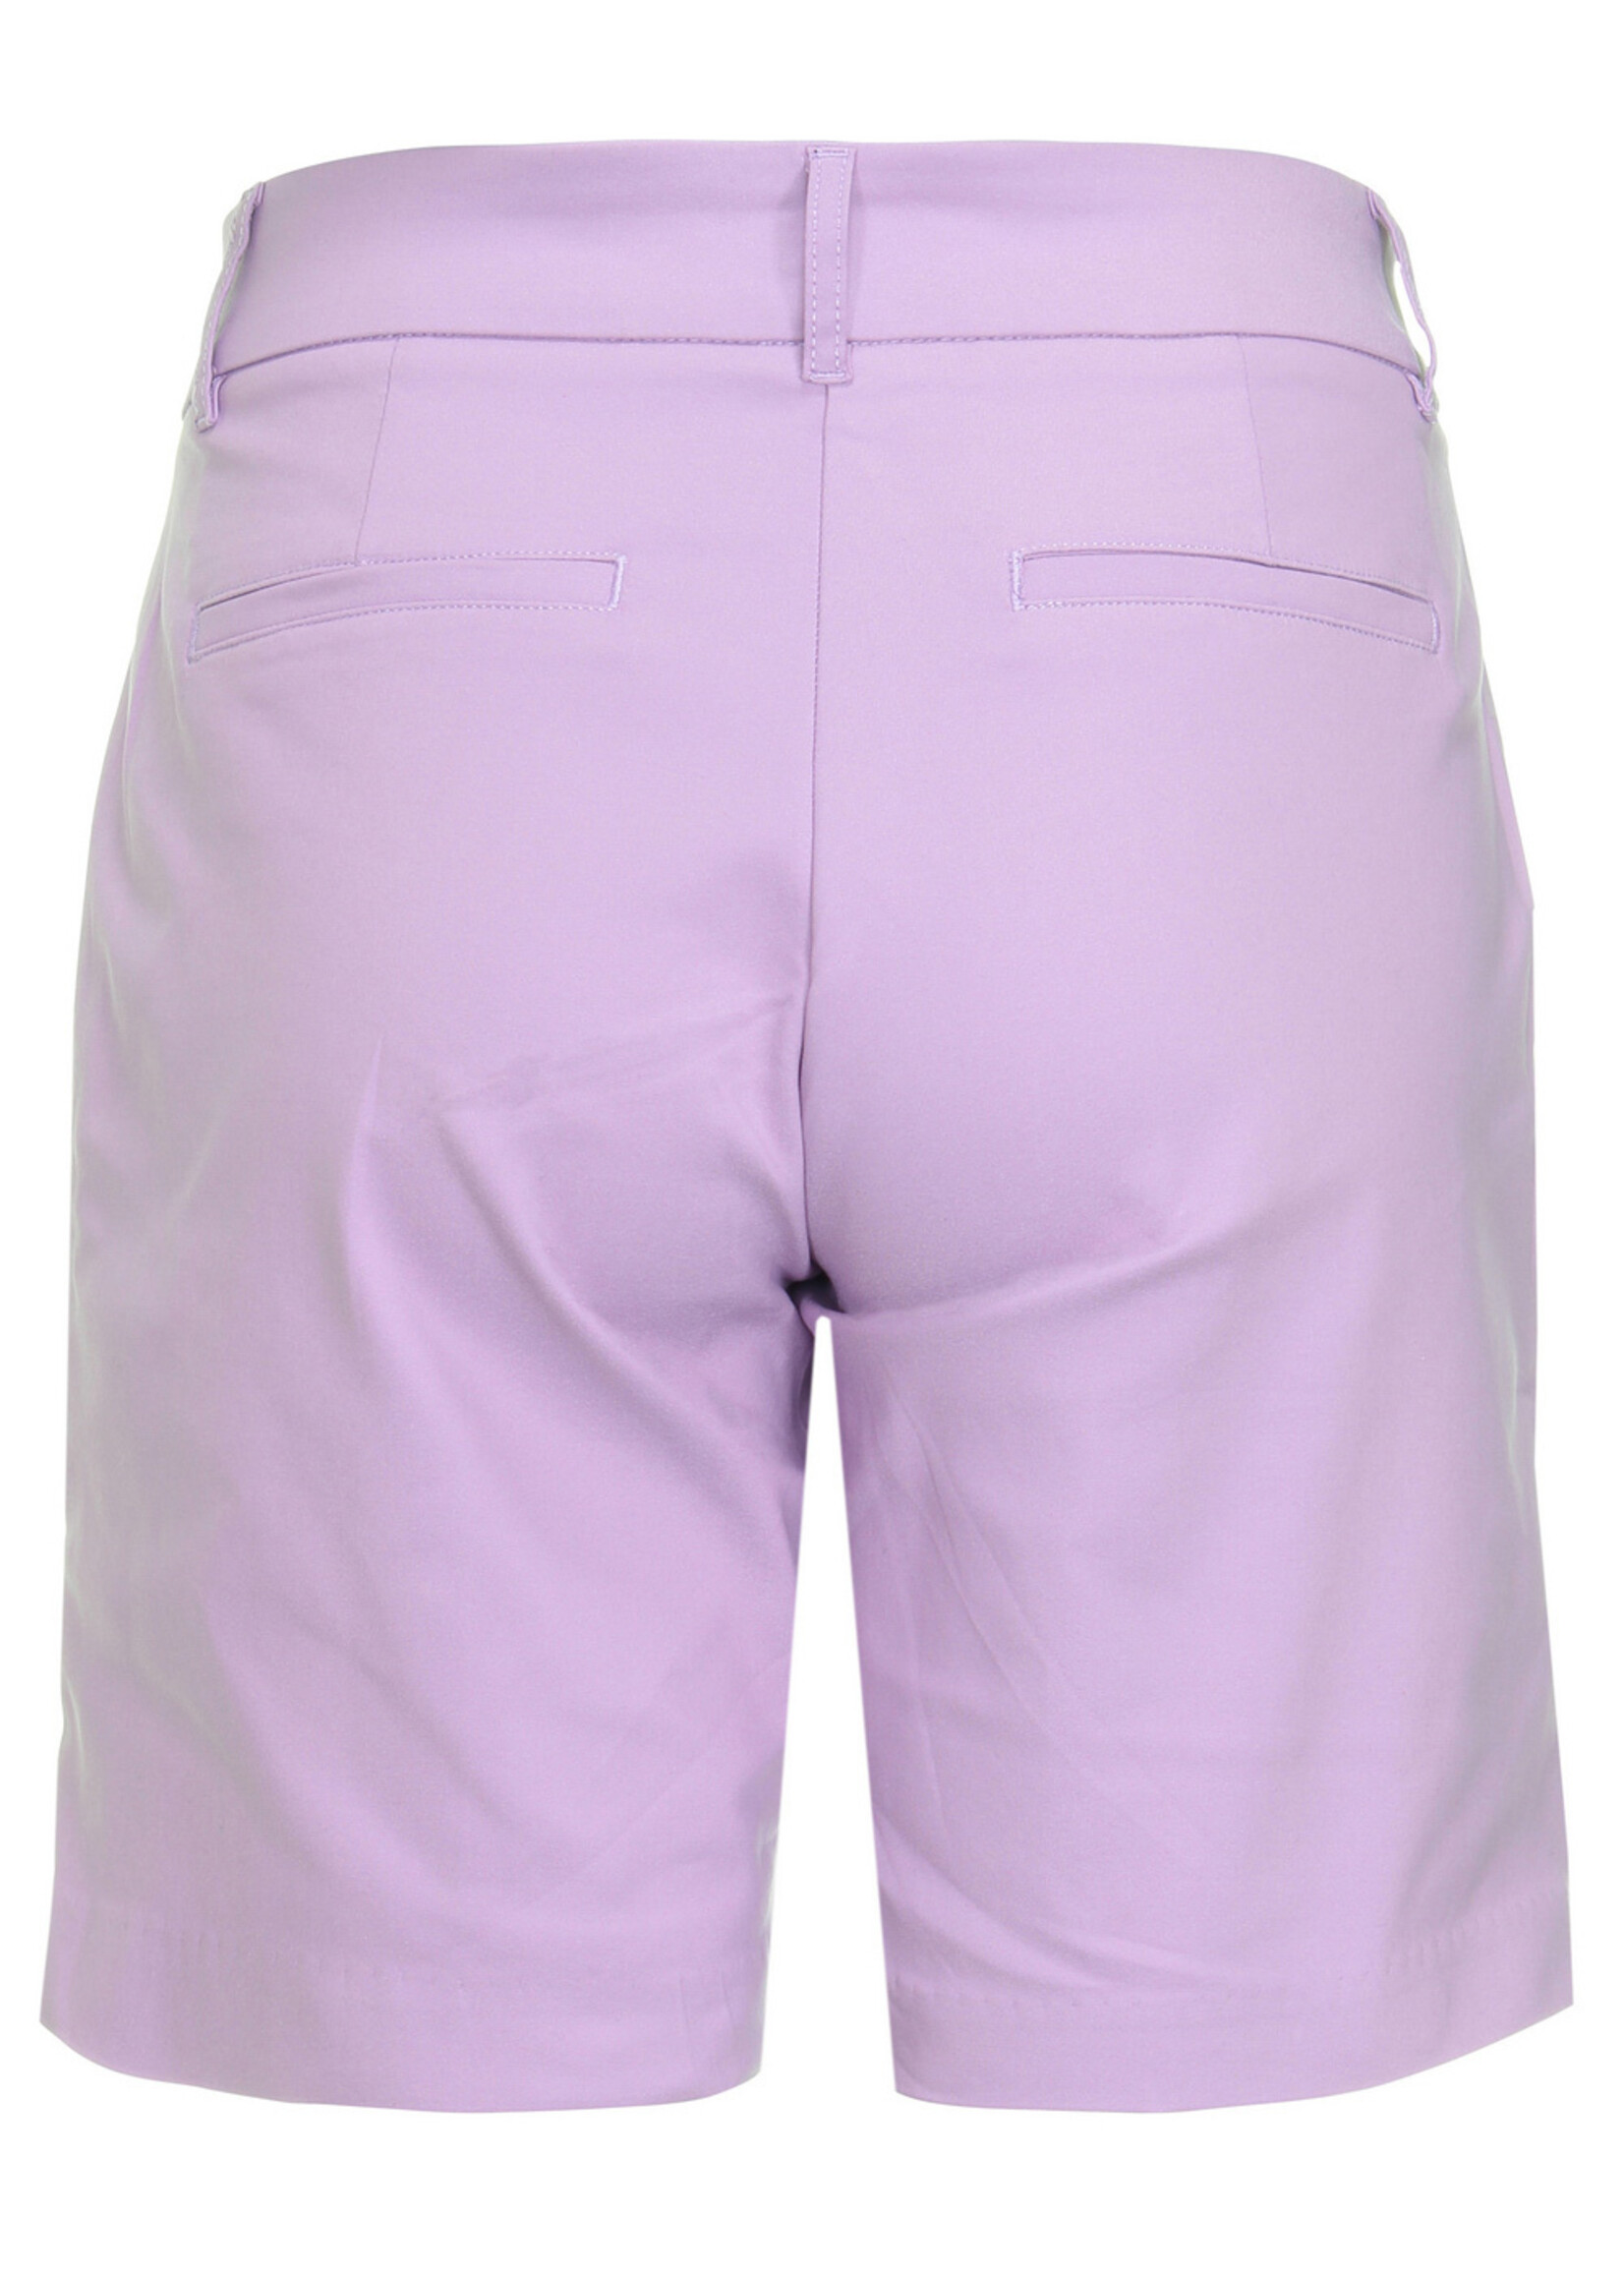 Red Button Short ava smart lilac srb4176